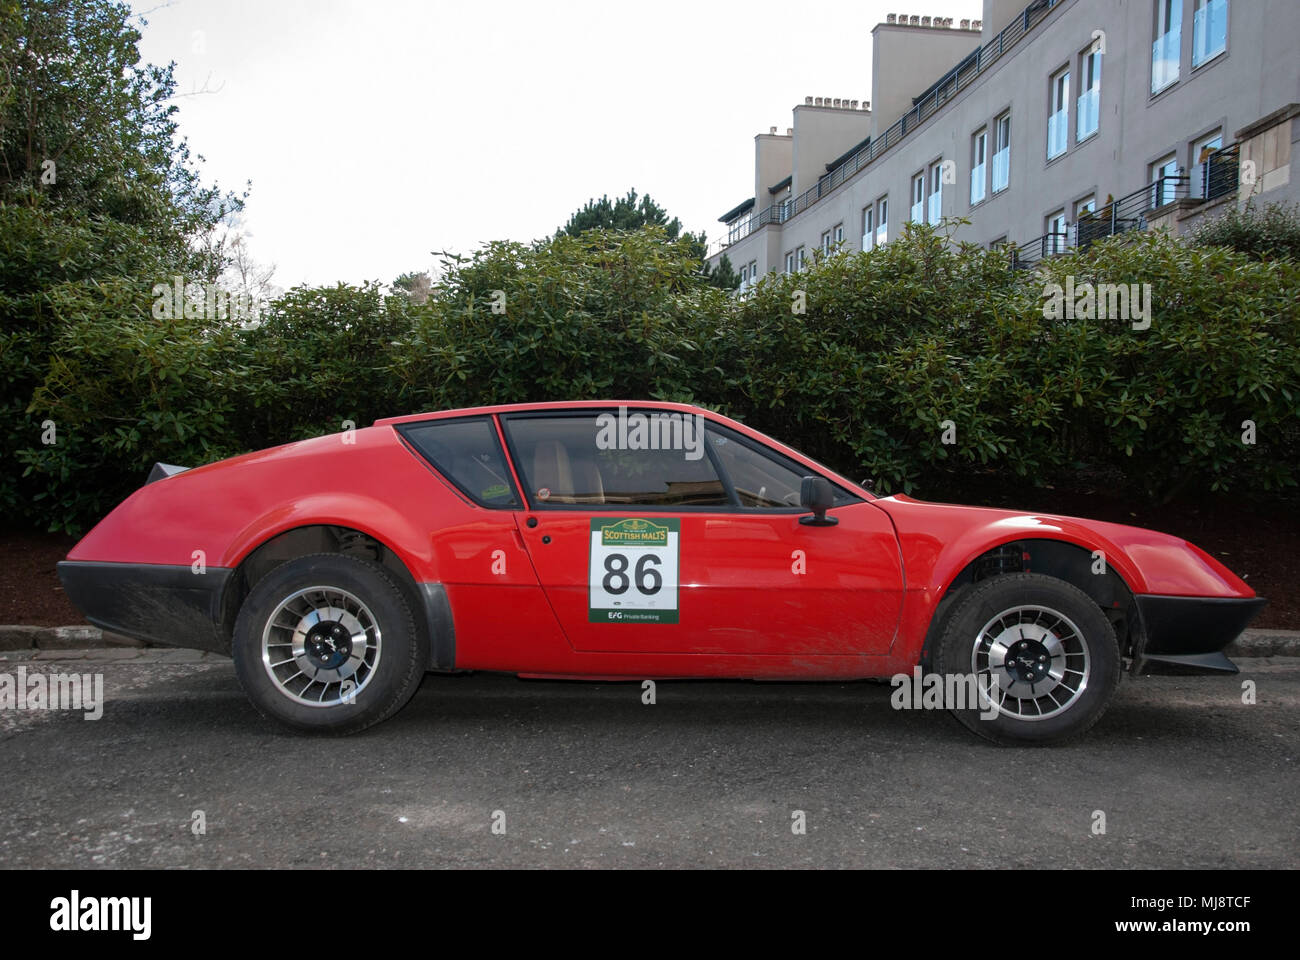 1982 Red Alpine Renault A310 V6 Sports Car right hand passengers side view of 1982 red alpine renault a310 v6 classic french left hand drive 2 two doo Stock Photo